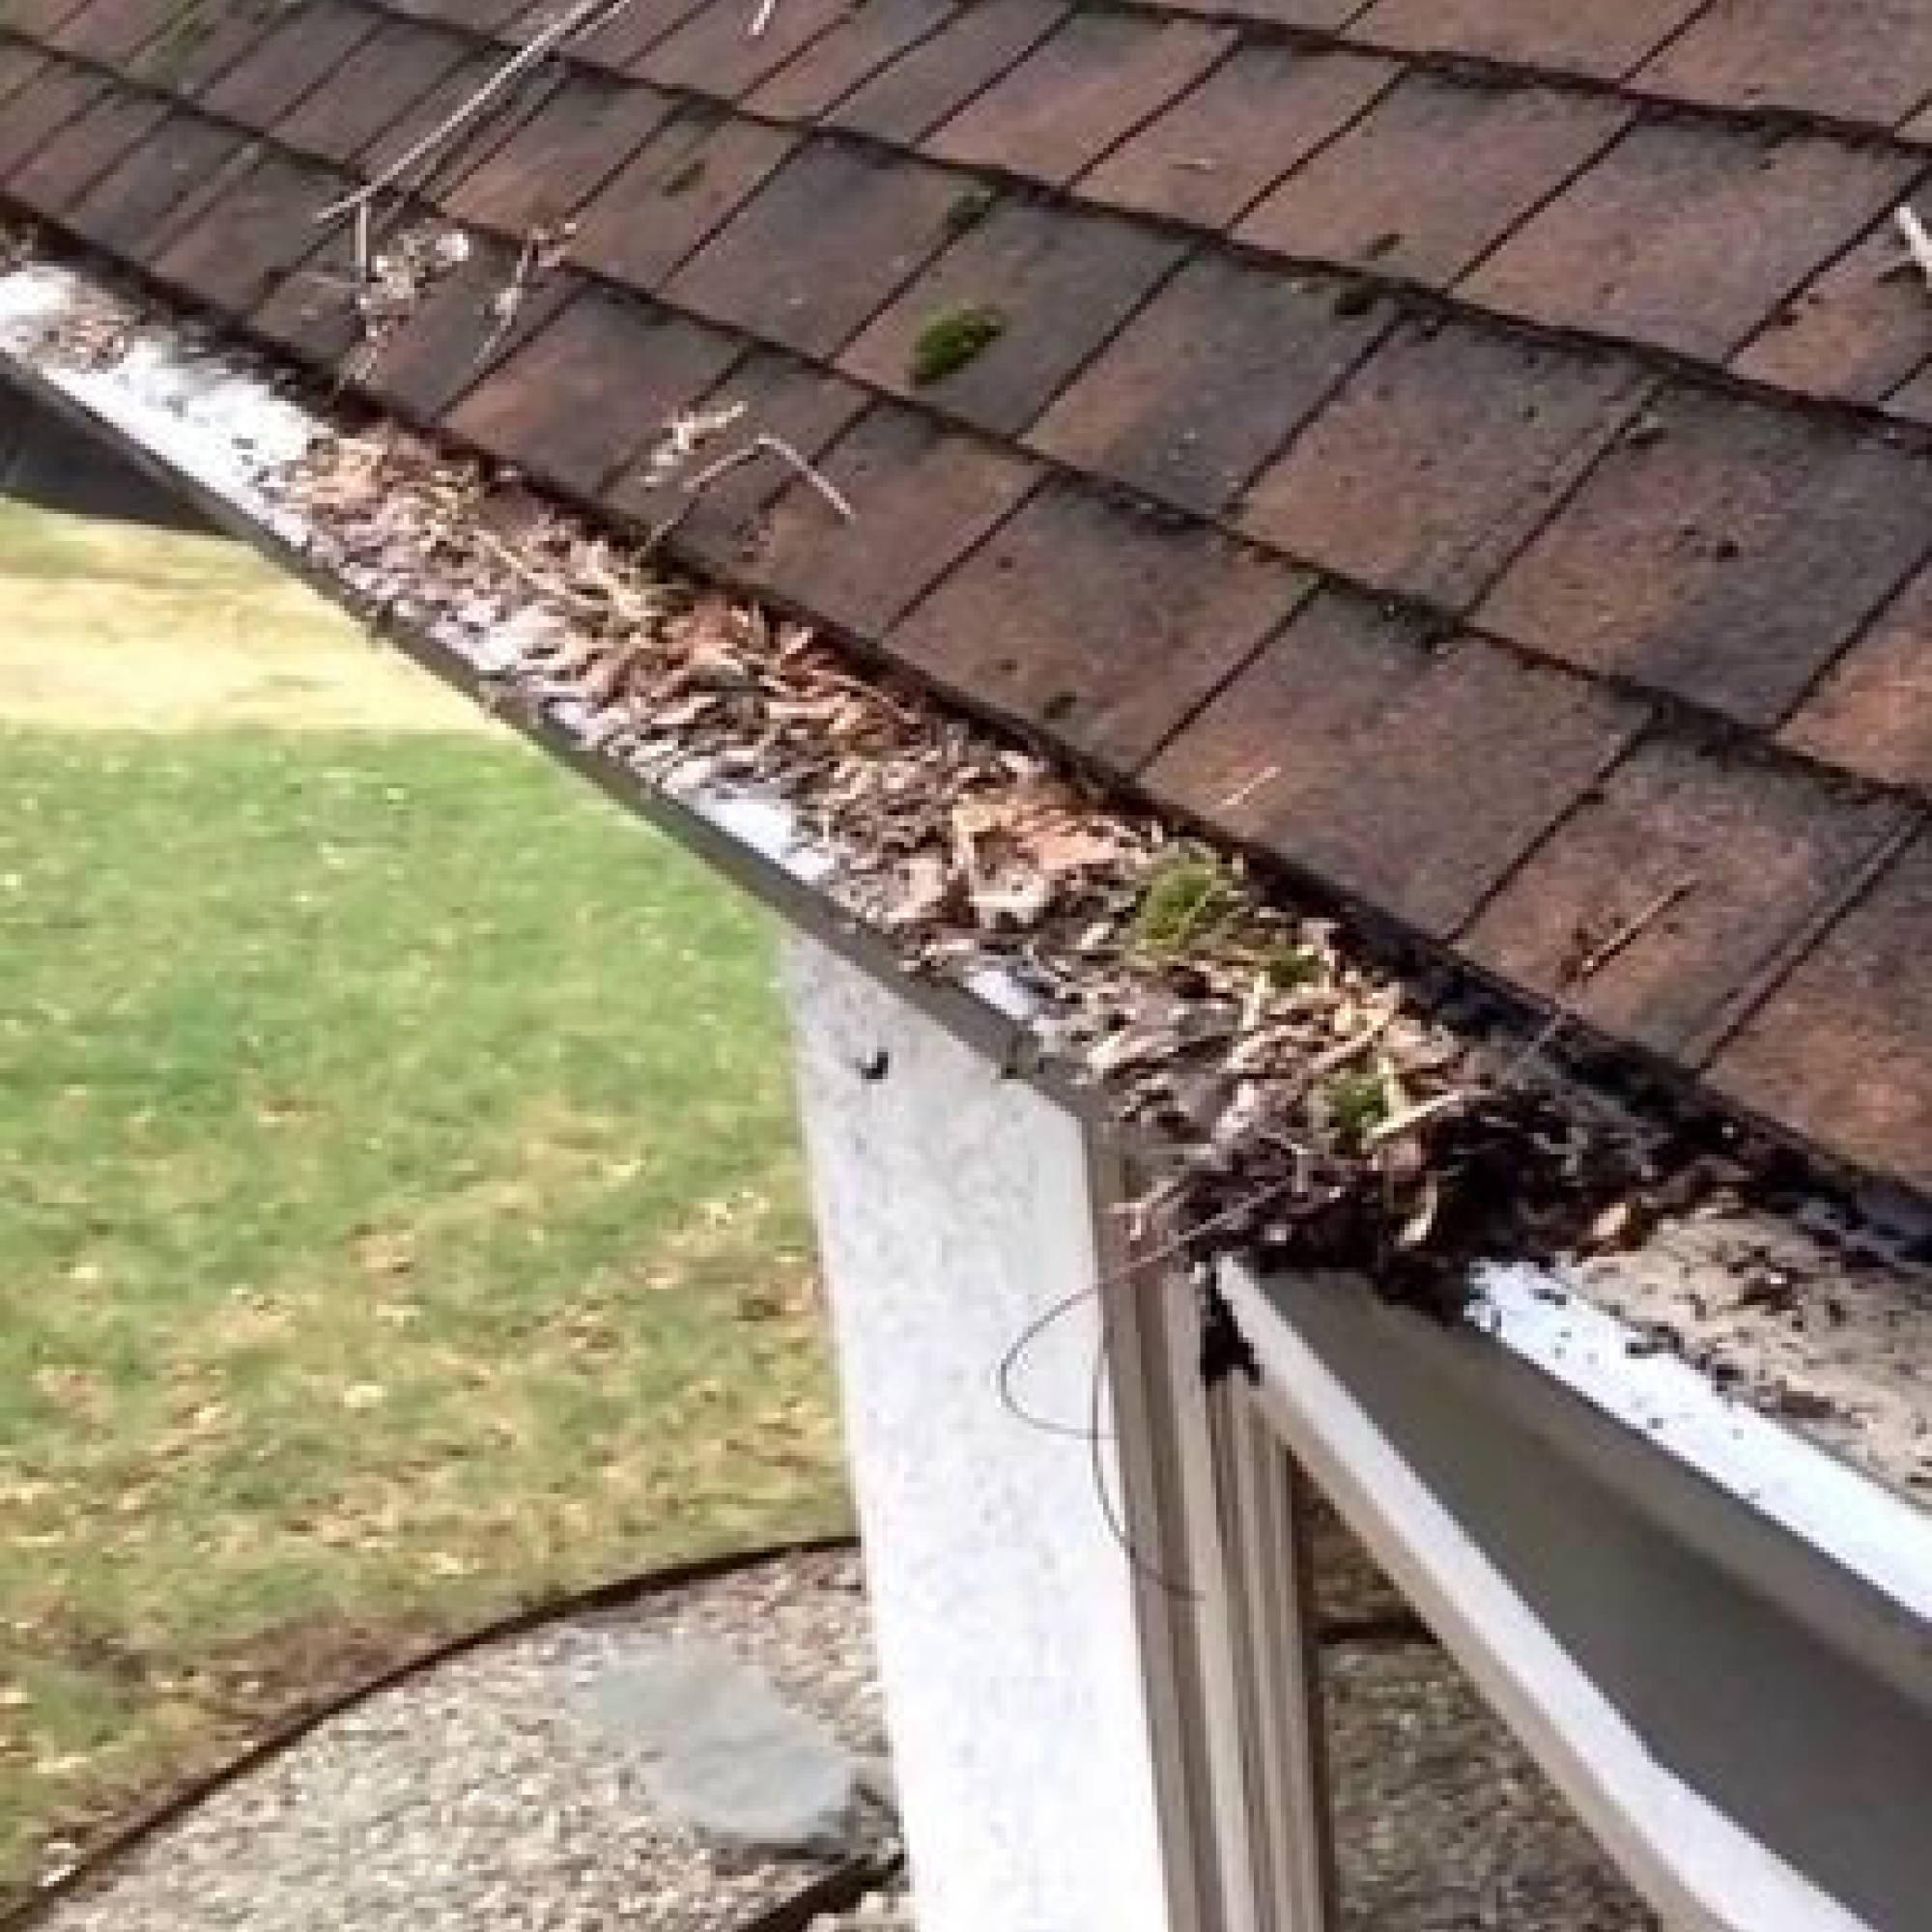 Debris laying on top of gutter microscreen